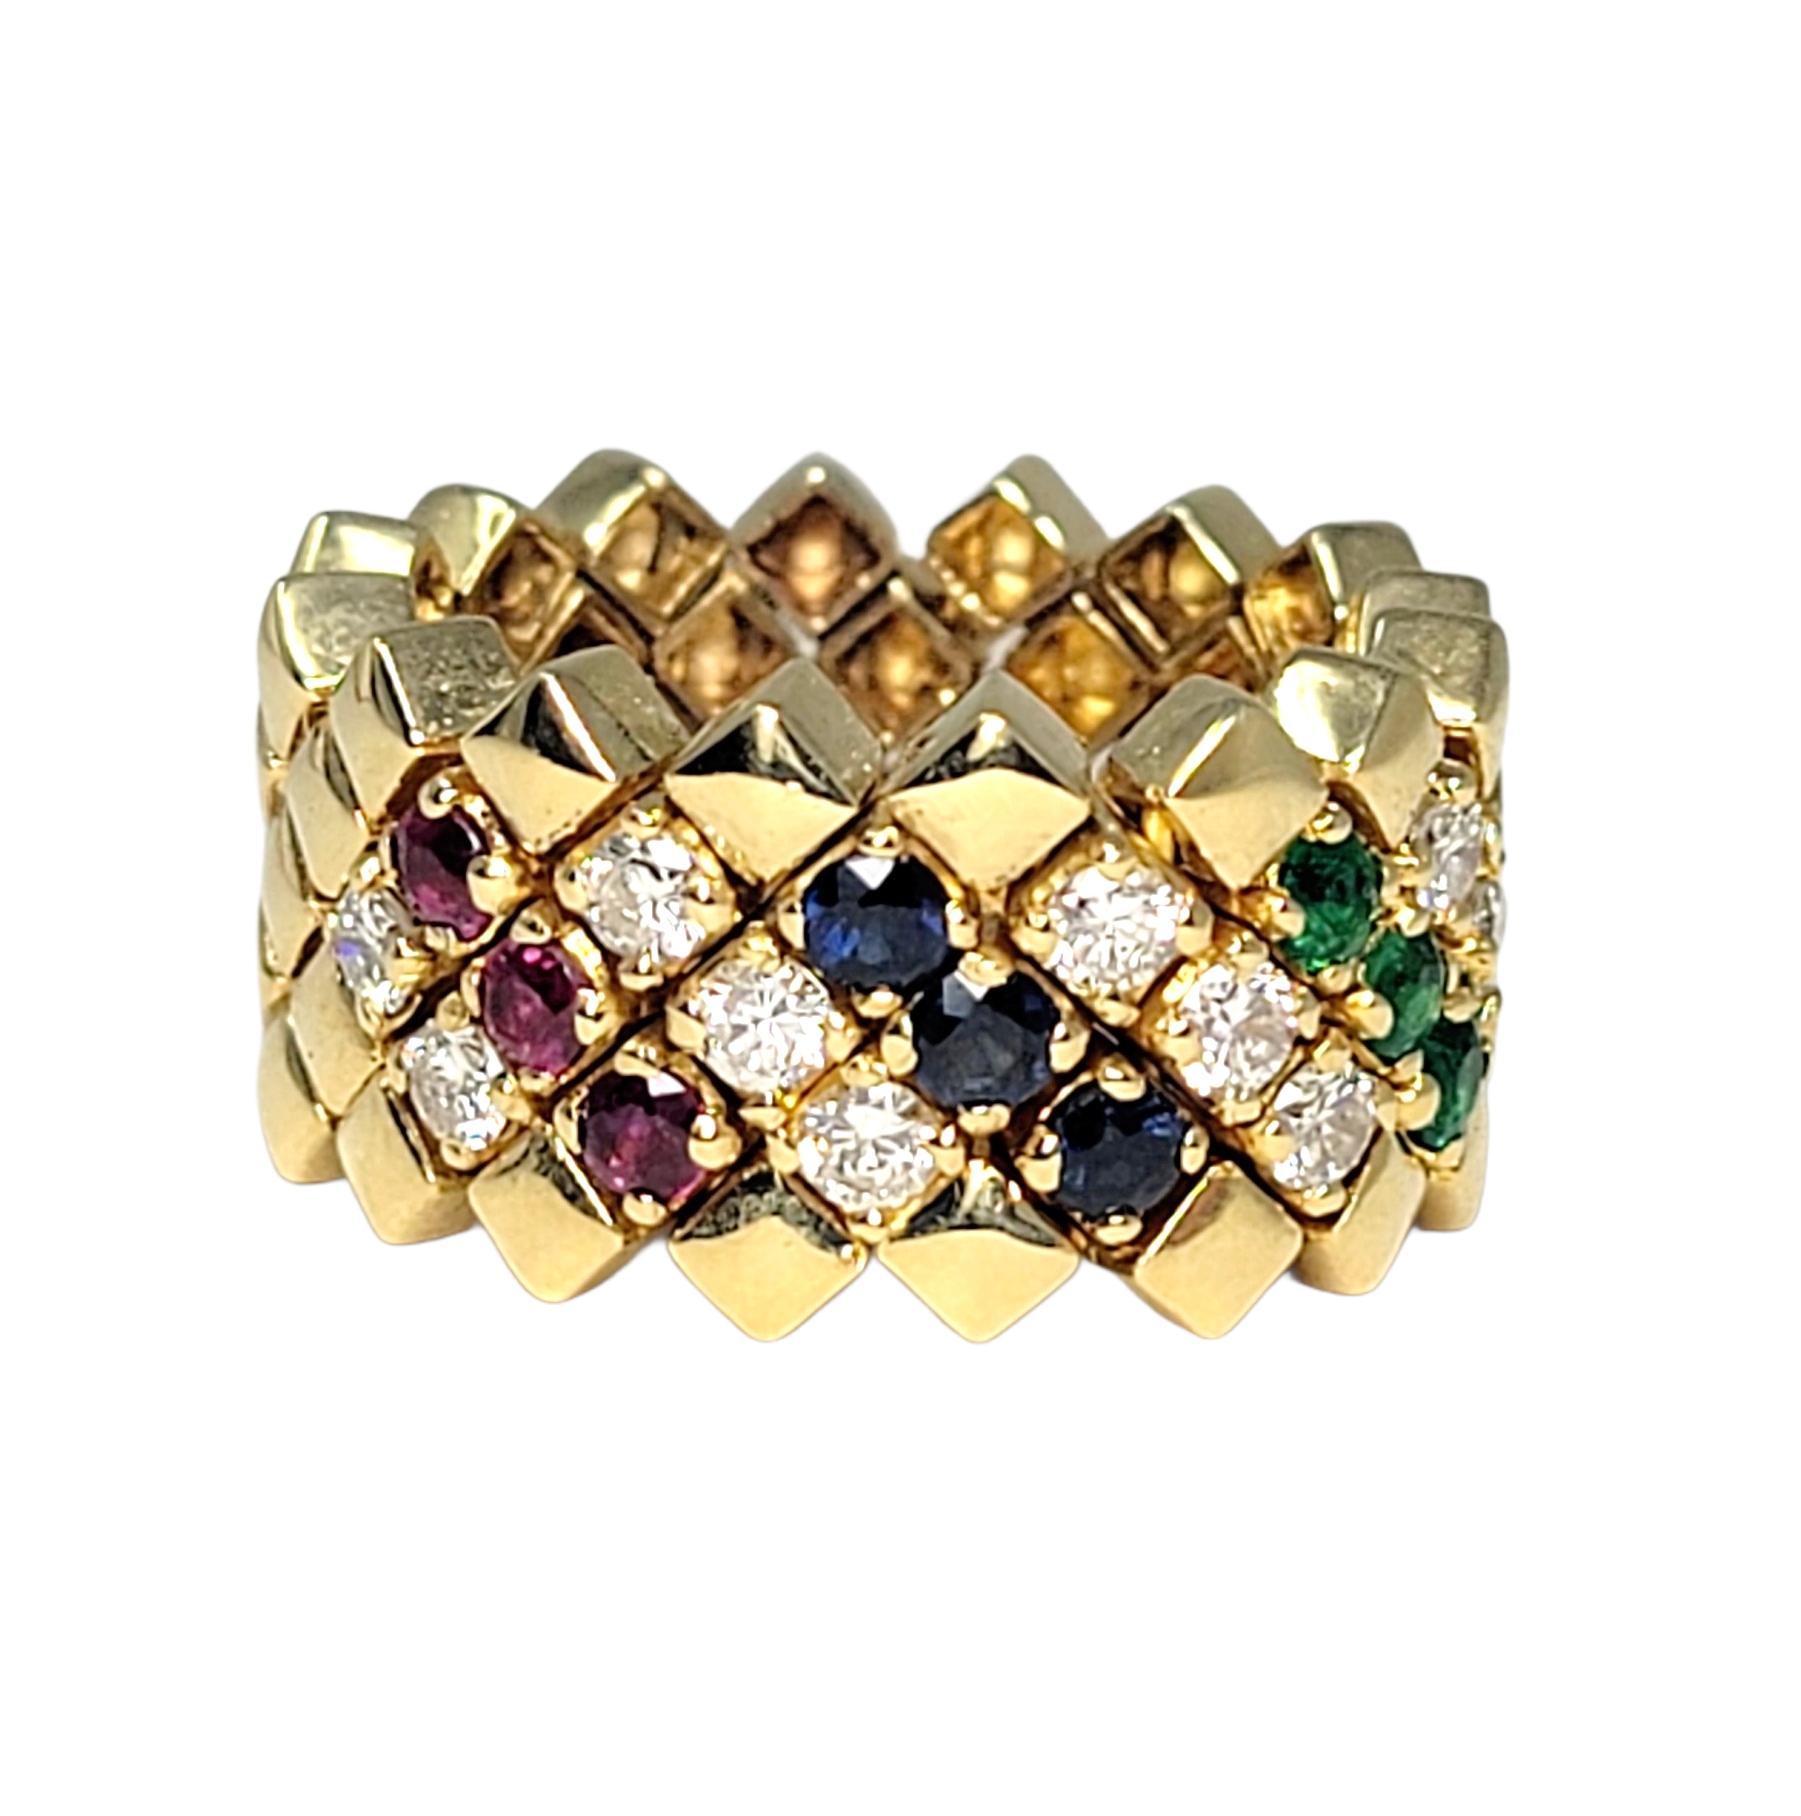 Emerald, Sapphire, Ruby and Diamond Flexible Link Ring 14 Karat Yellow Gold In Good Condition For Sale In Scottsdale, AZ